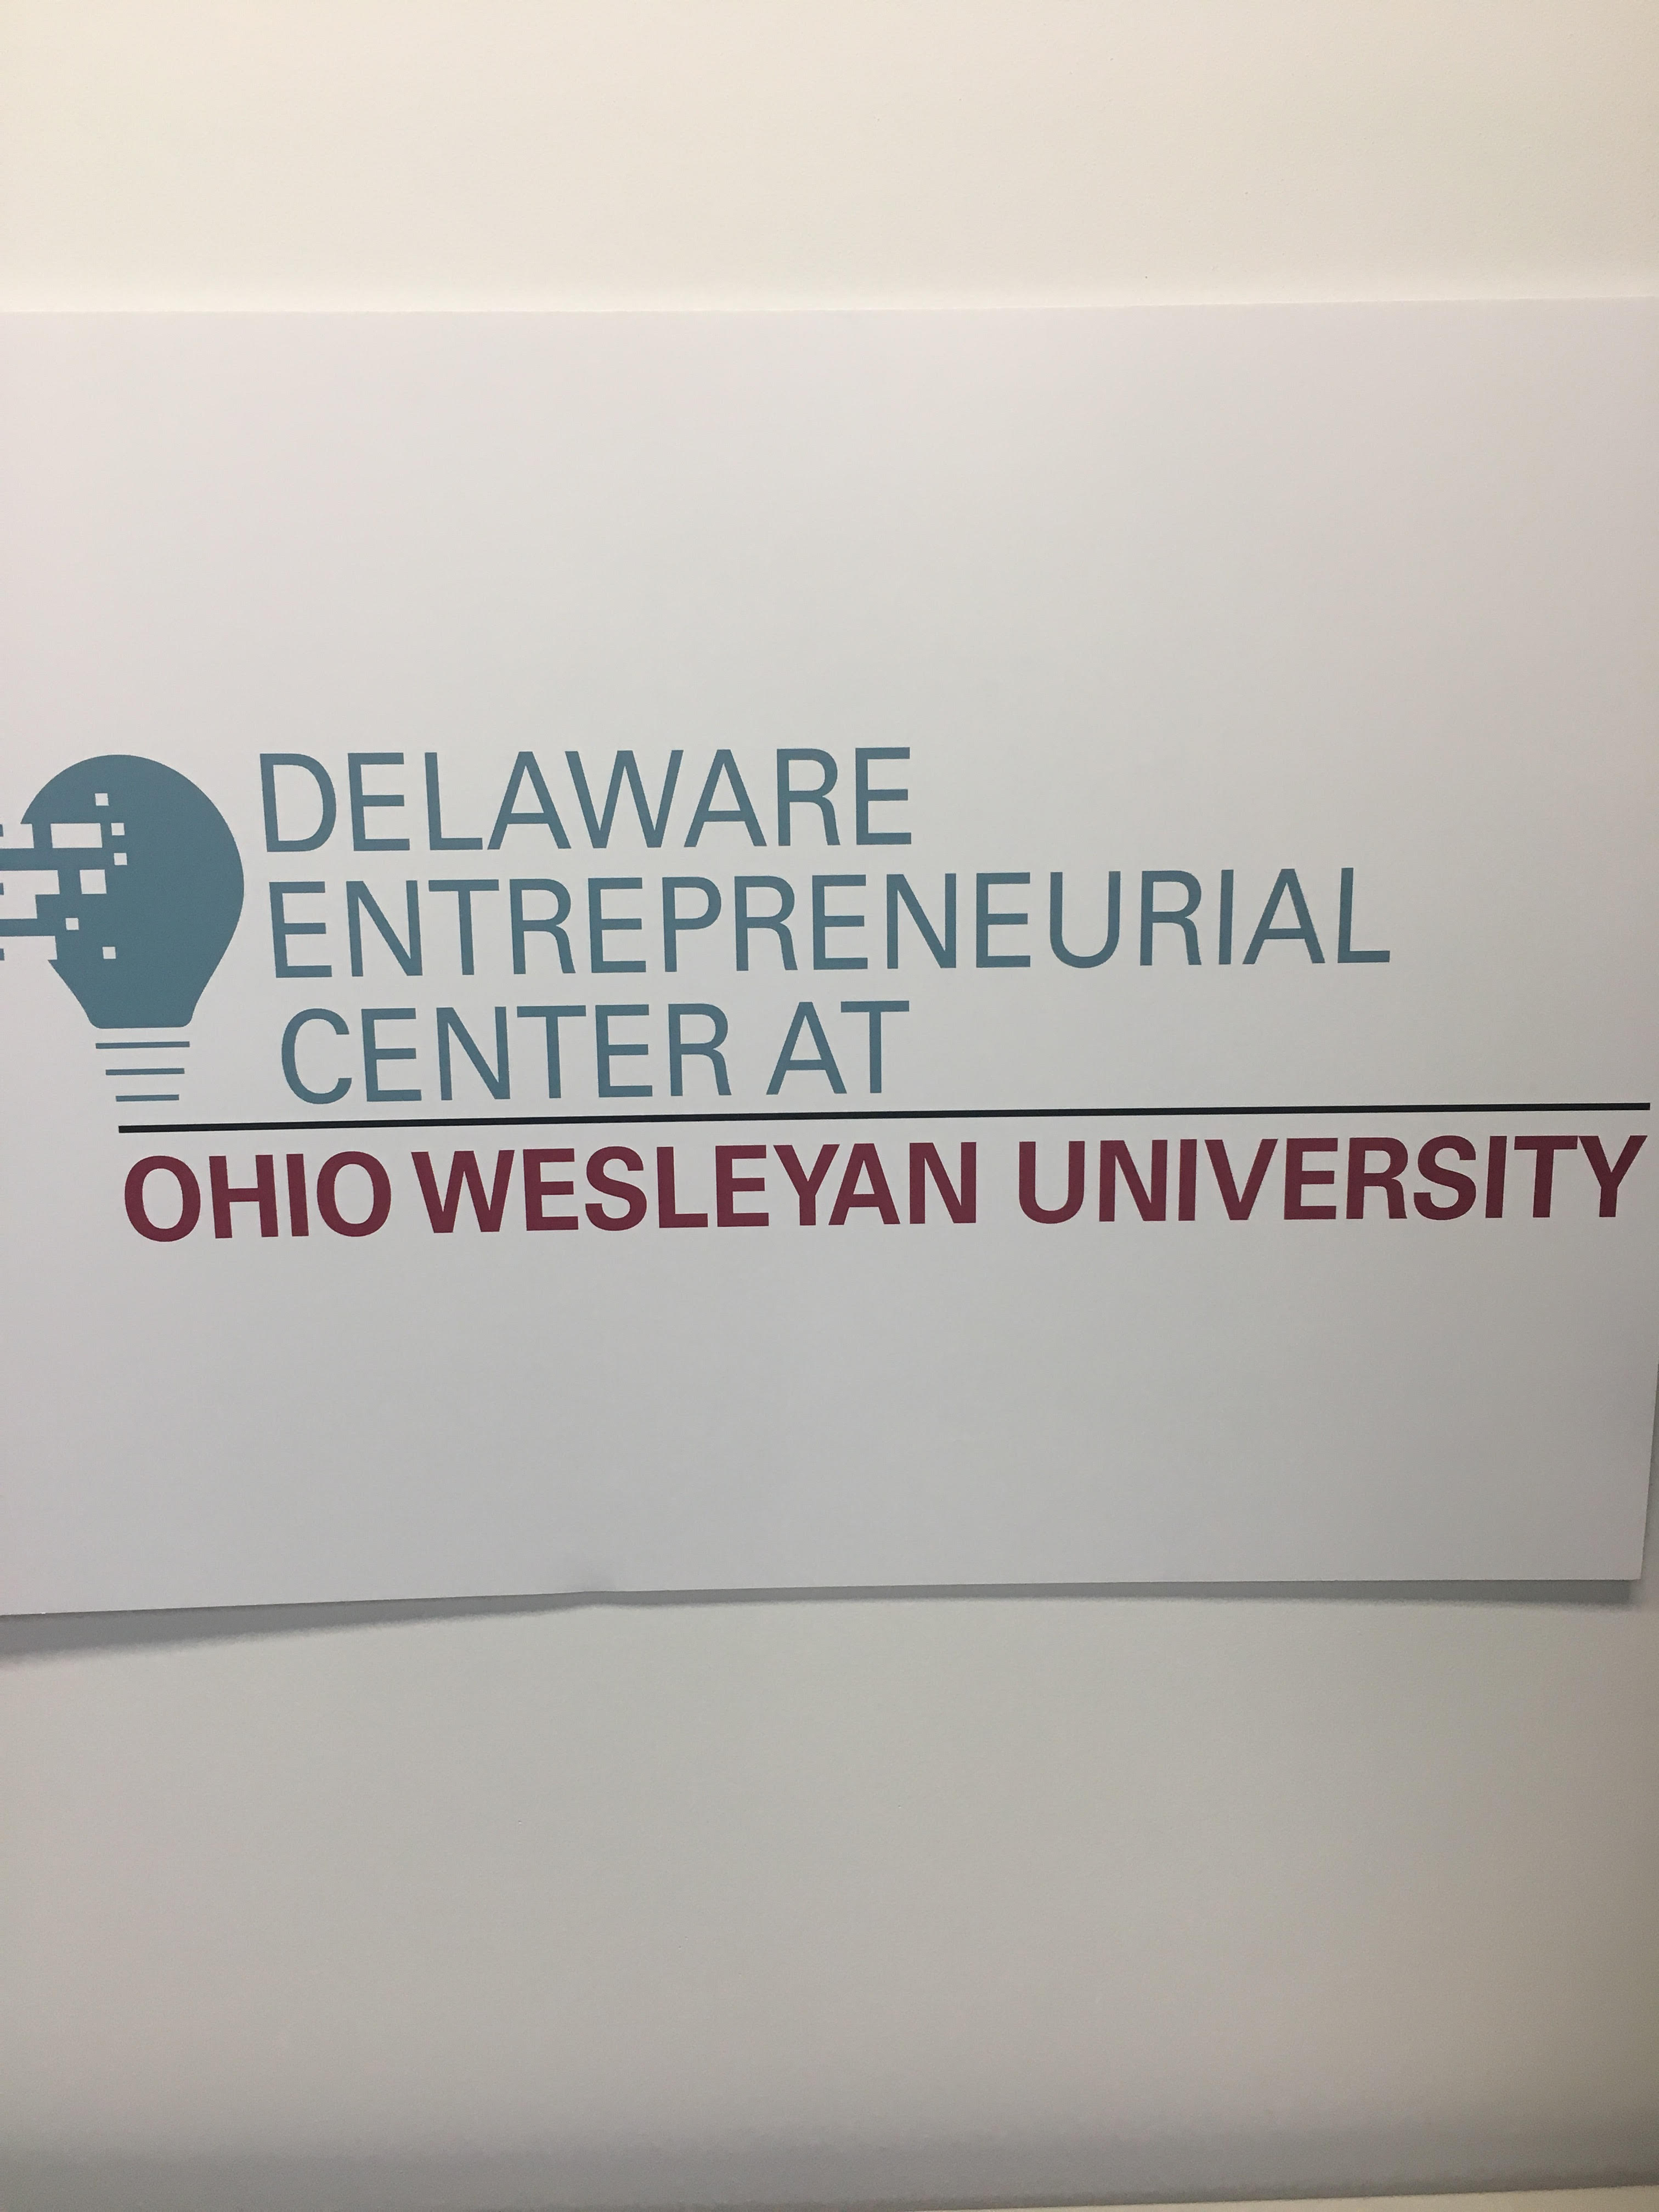 Ohio Wesleyan, City of Delaware and Delaware County Show Collaboration with Entrepreneurial Ideas